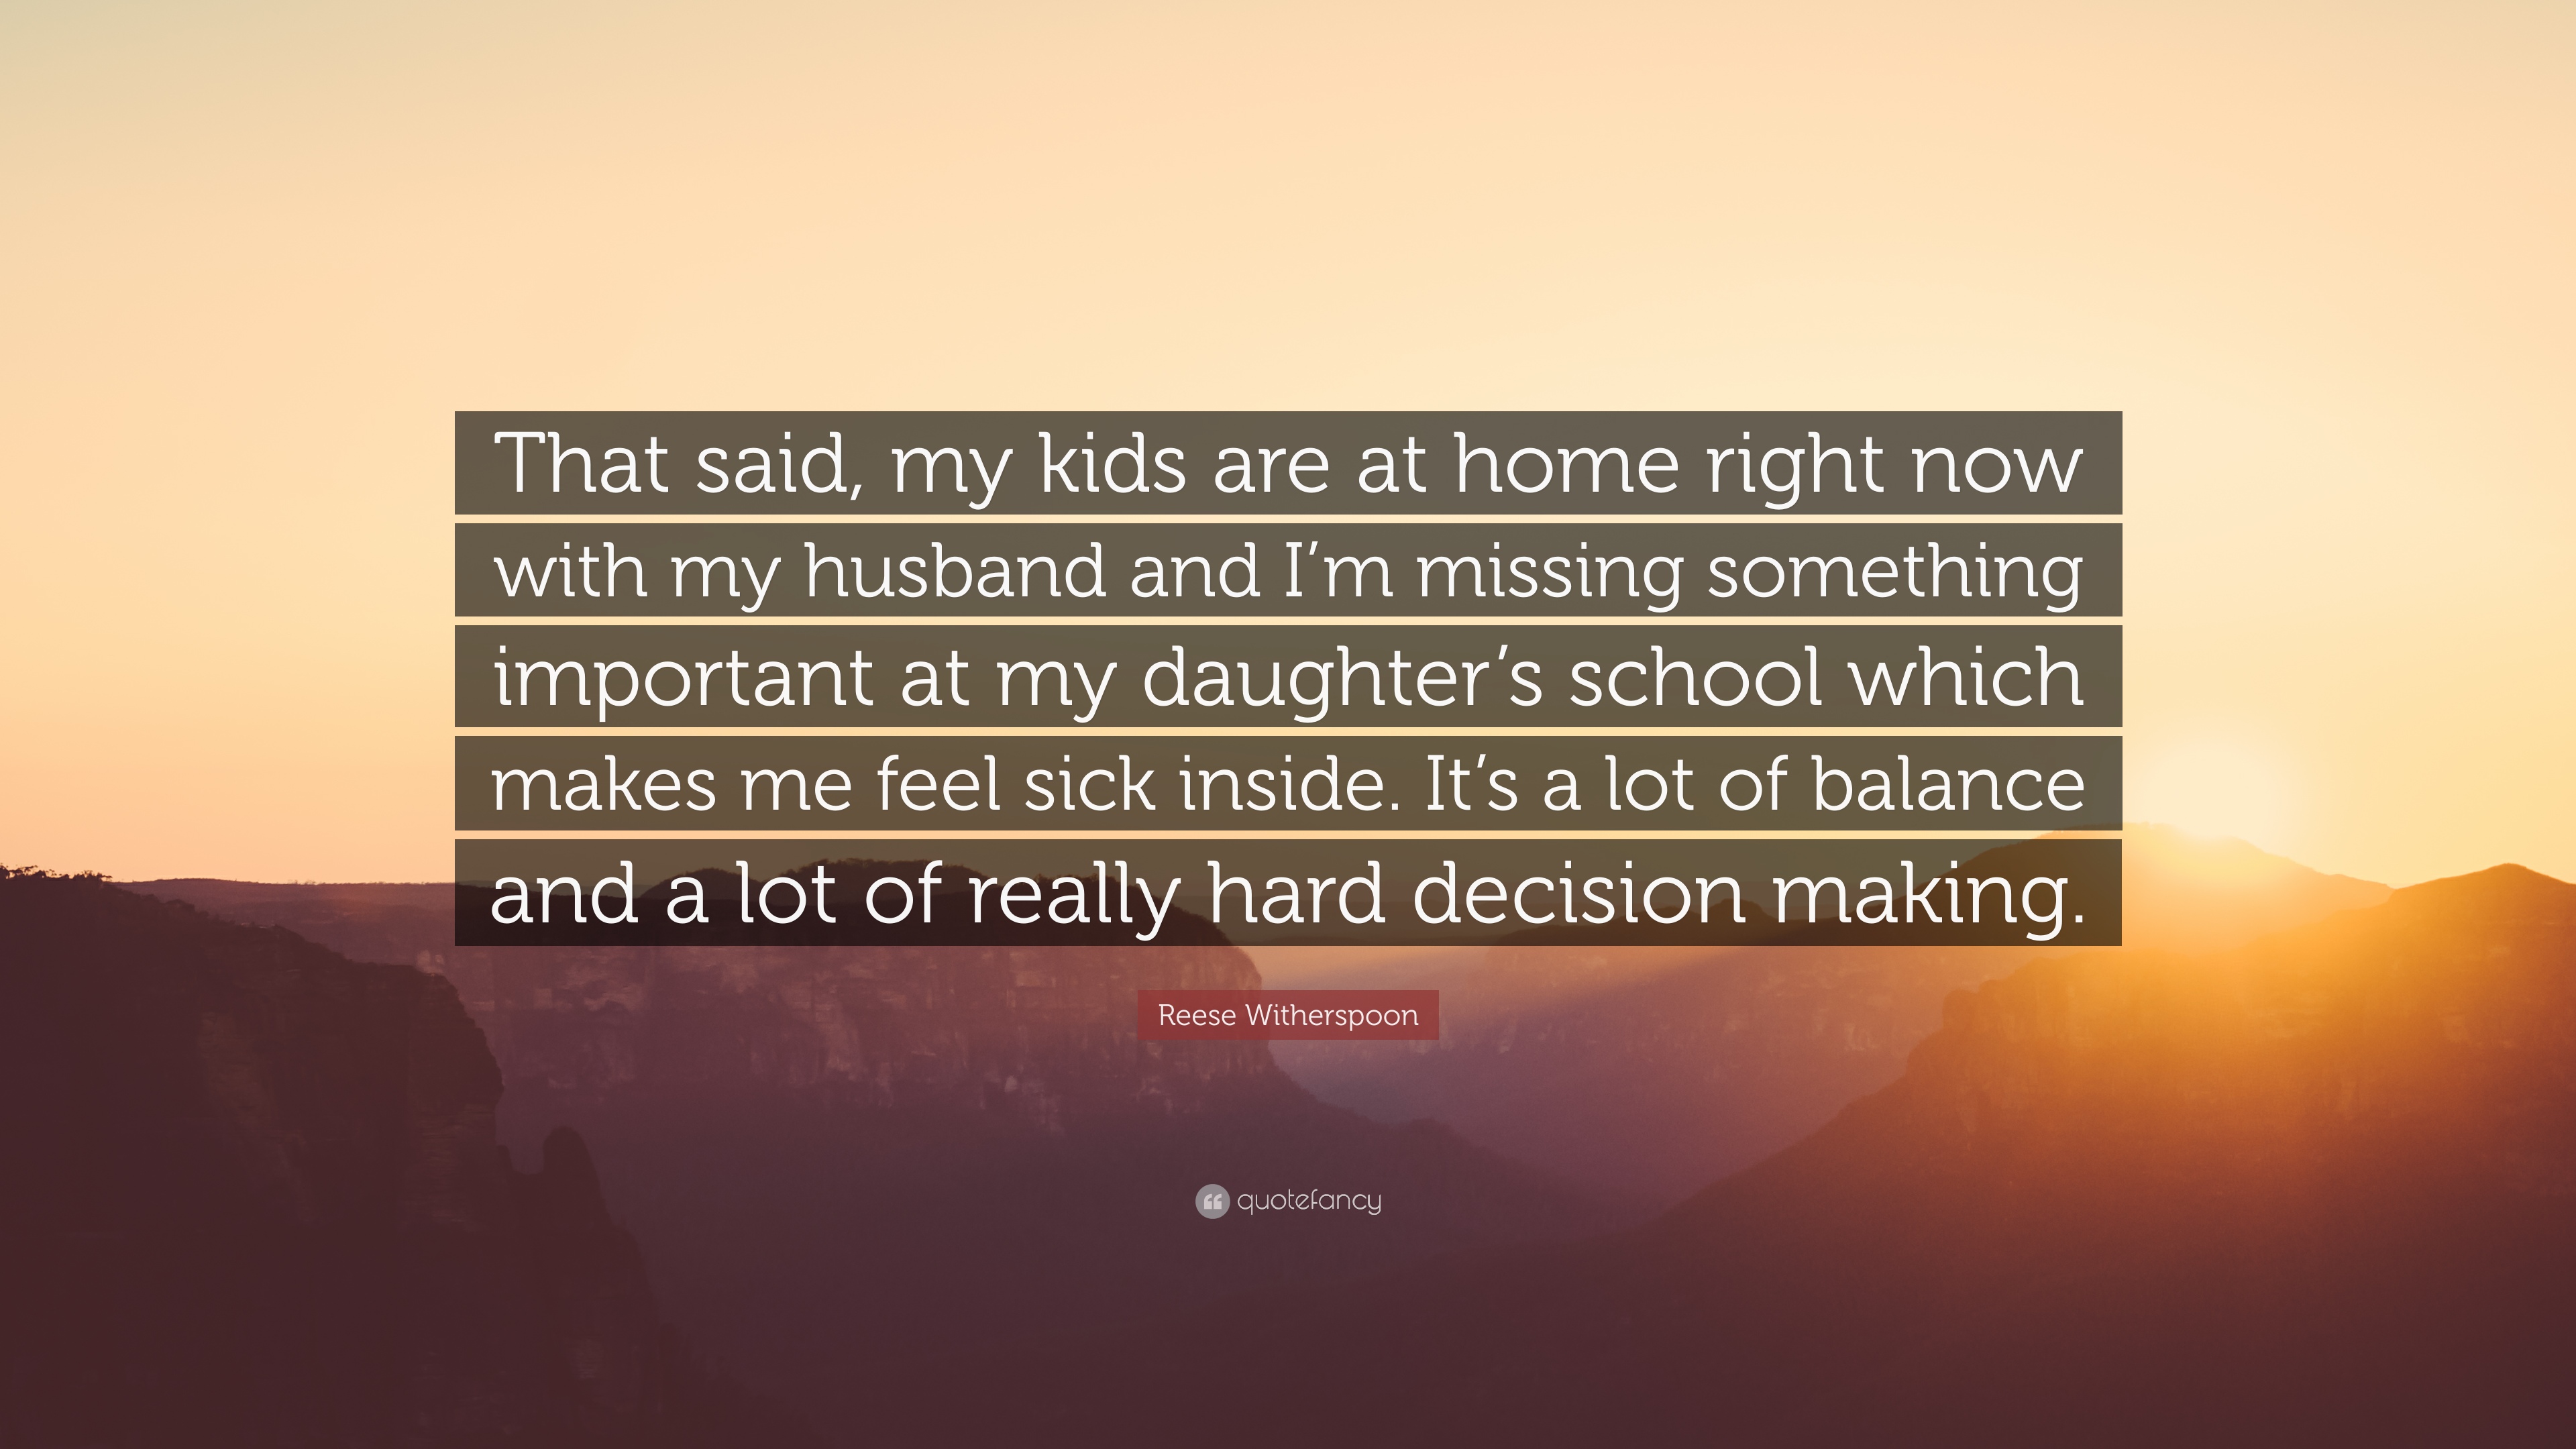 Quotes For Sick Daughter